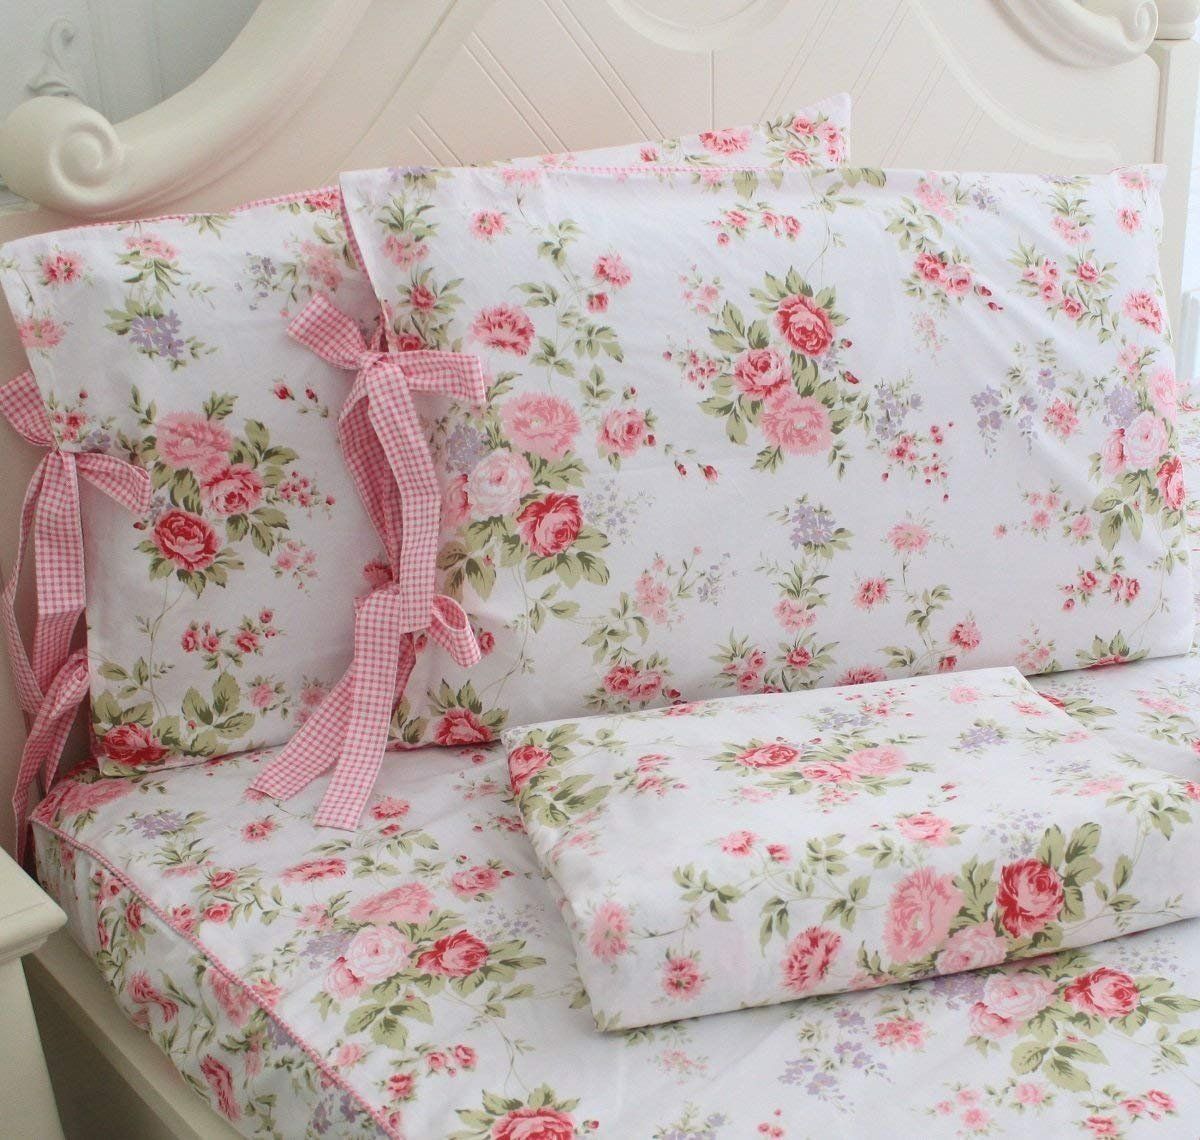 FADFAY Cotton Bed Sheets Set Rose Floral Bed Sheets 4-Piece Queen Size | Amazon (US)